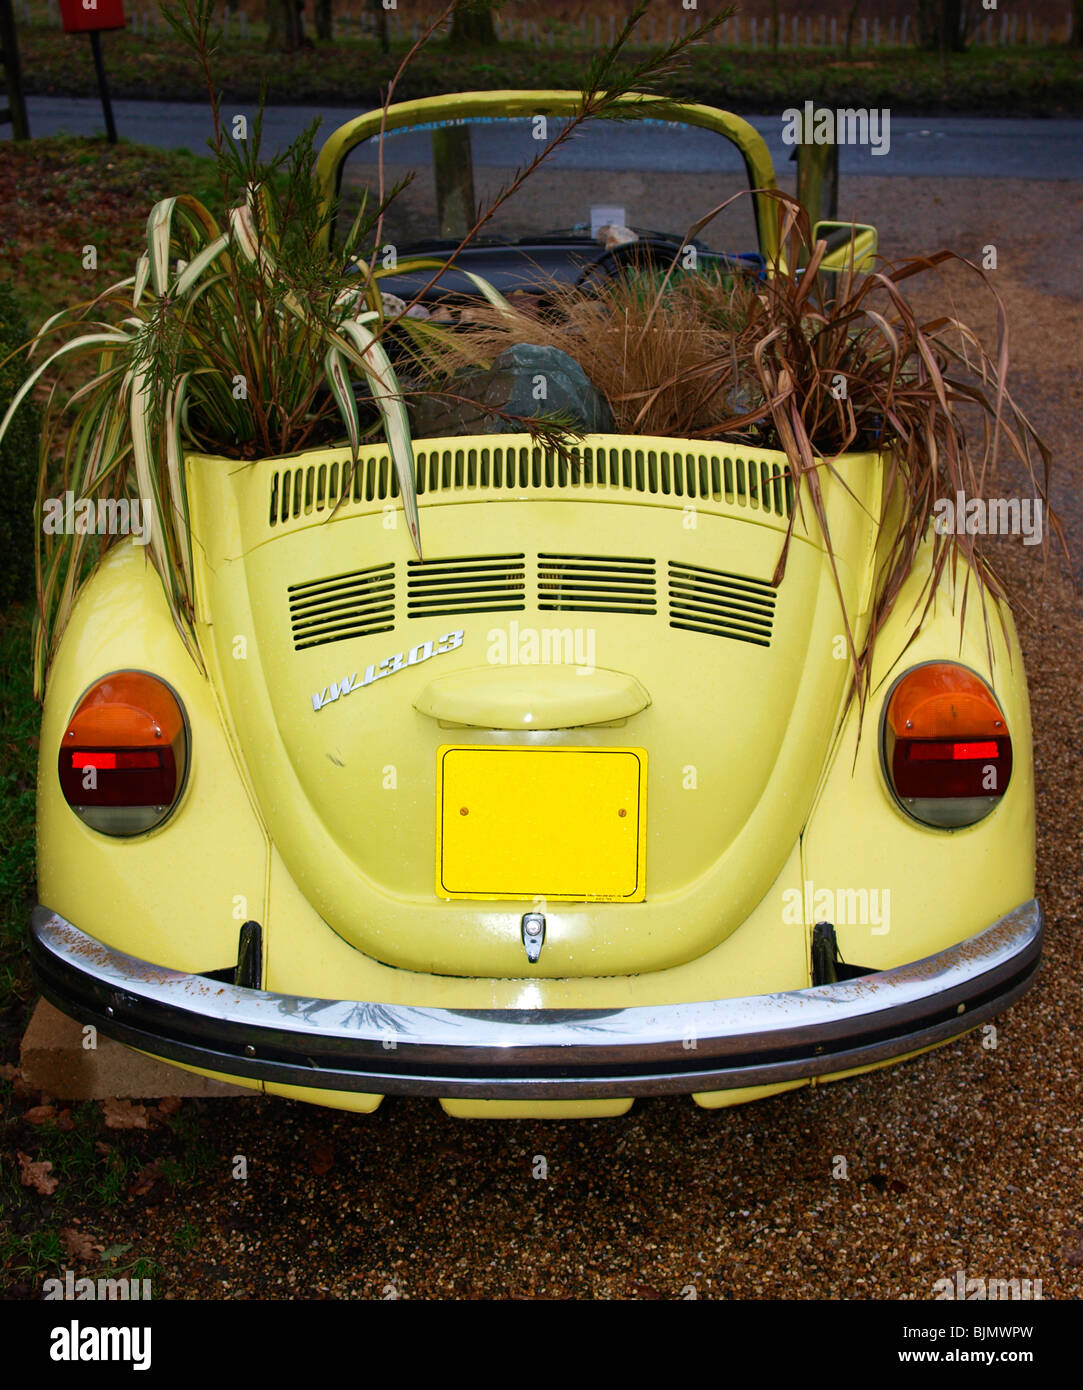 Yellow vw convertible car with plants growing inside Stock Photo